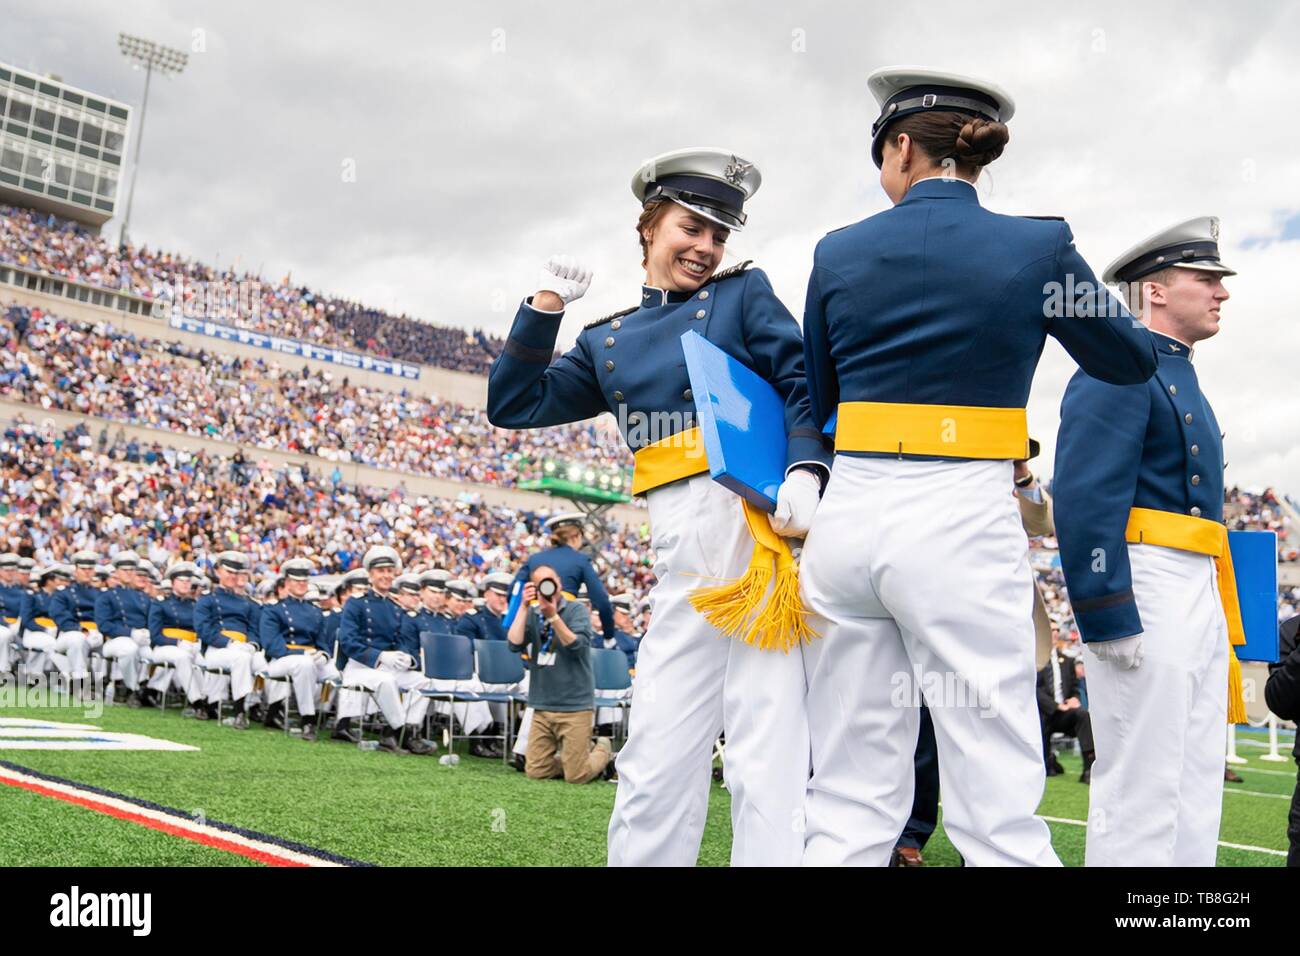 U.S. Air Force Academy cadets celebrate at the conclusion of graduation ceremonies at the USAF Academy Falcon Stadium May 30, 2019 in Colorado Springs, Colorado. U.S. President Donald Trump gave the commencement address to the more than 900 graduates. Credit: Planetpix/Alamy Live News Stock Photo